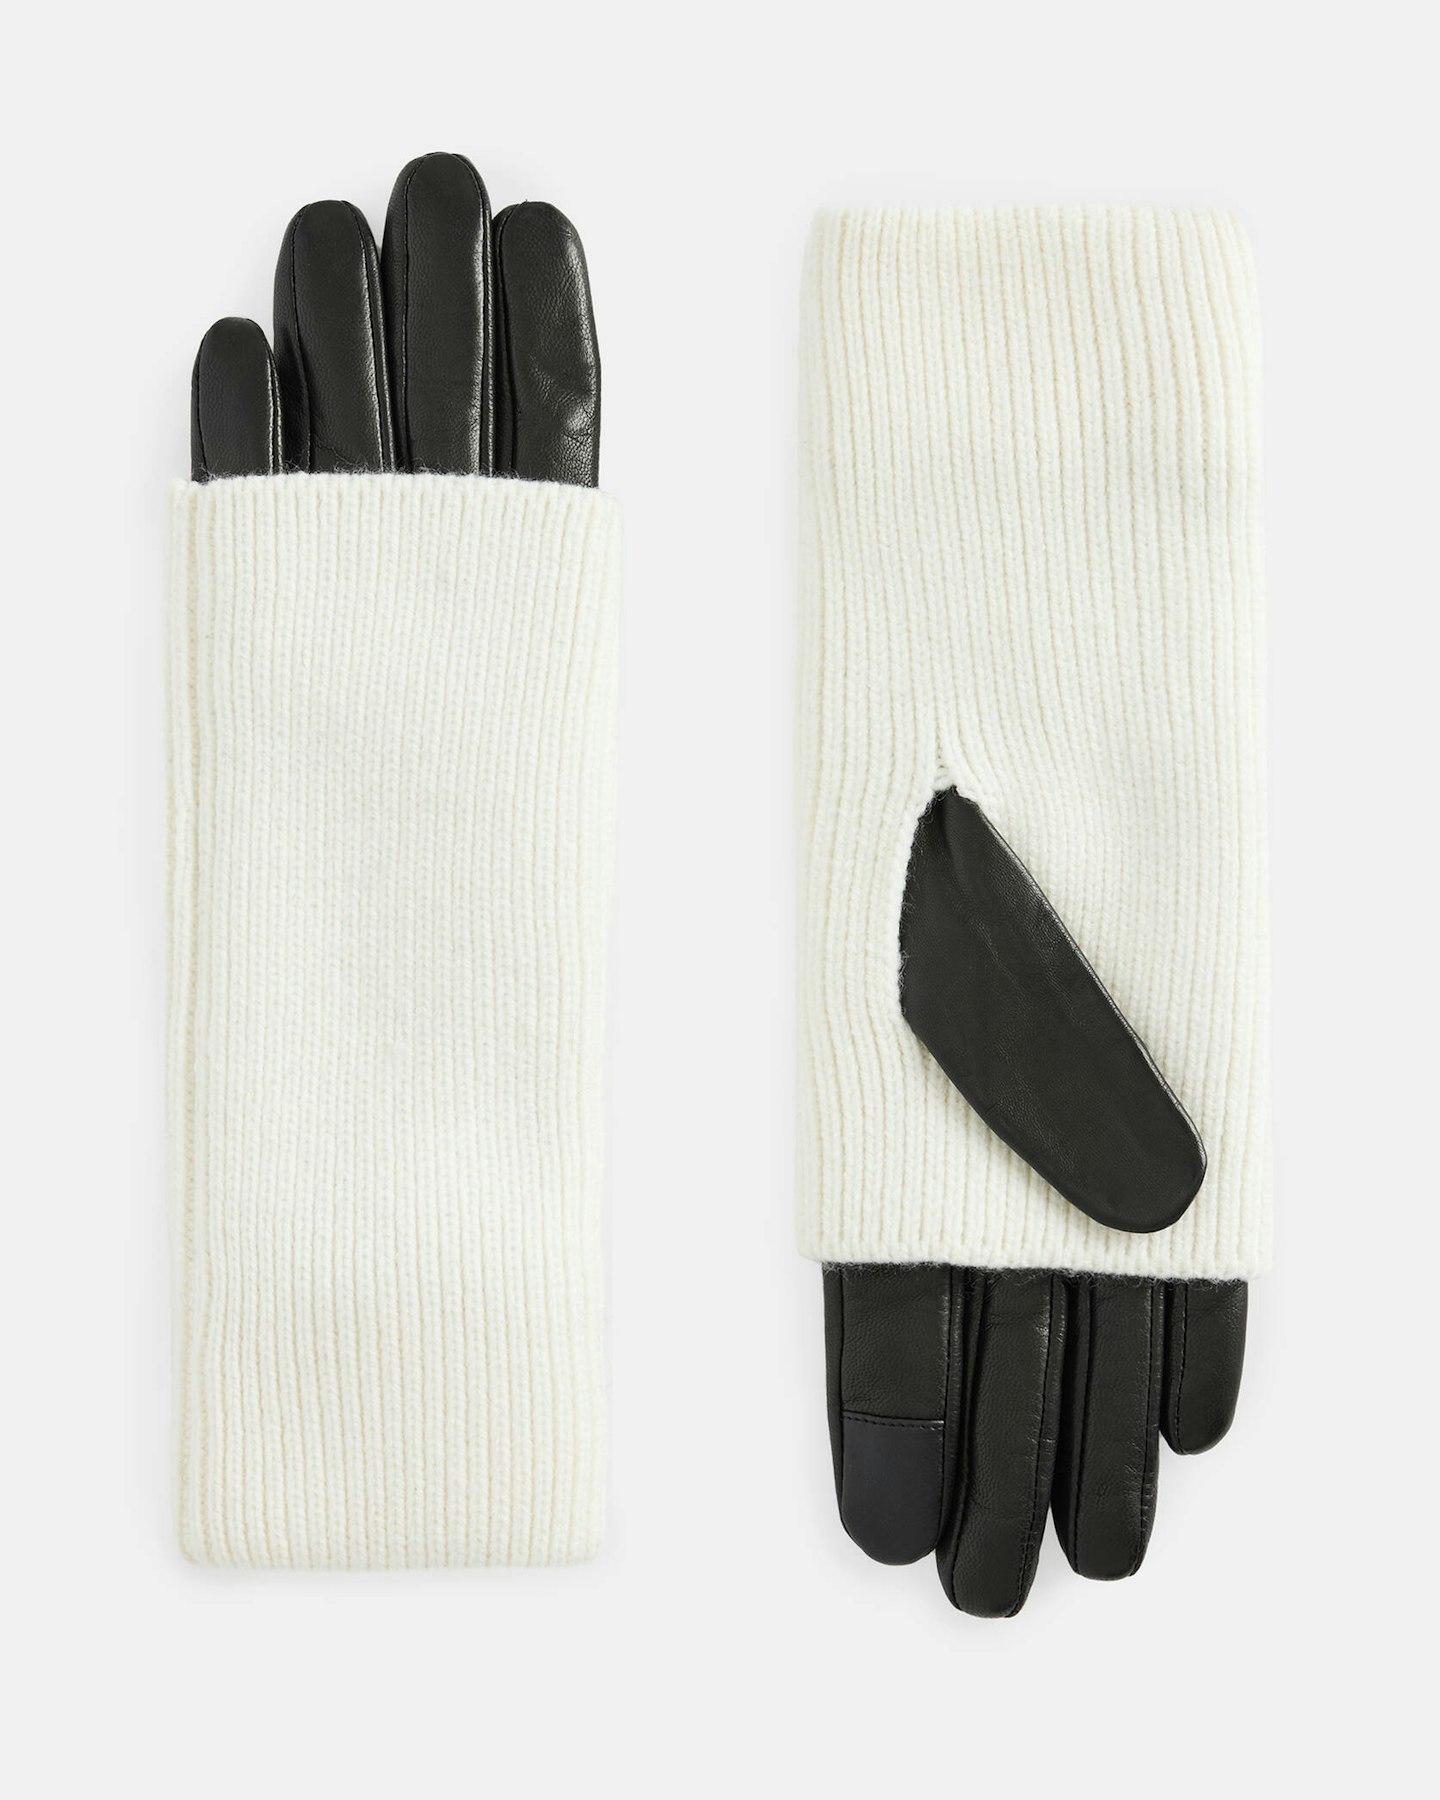 All Saints, Zoya Extendable Knit Cuff Leather Gloves